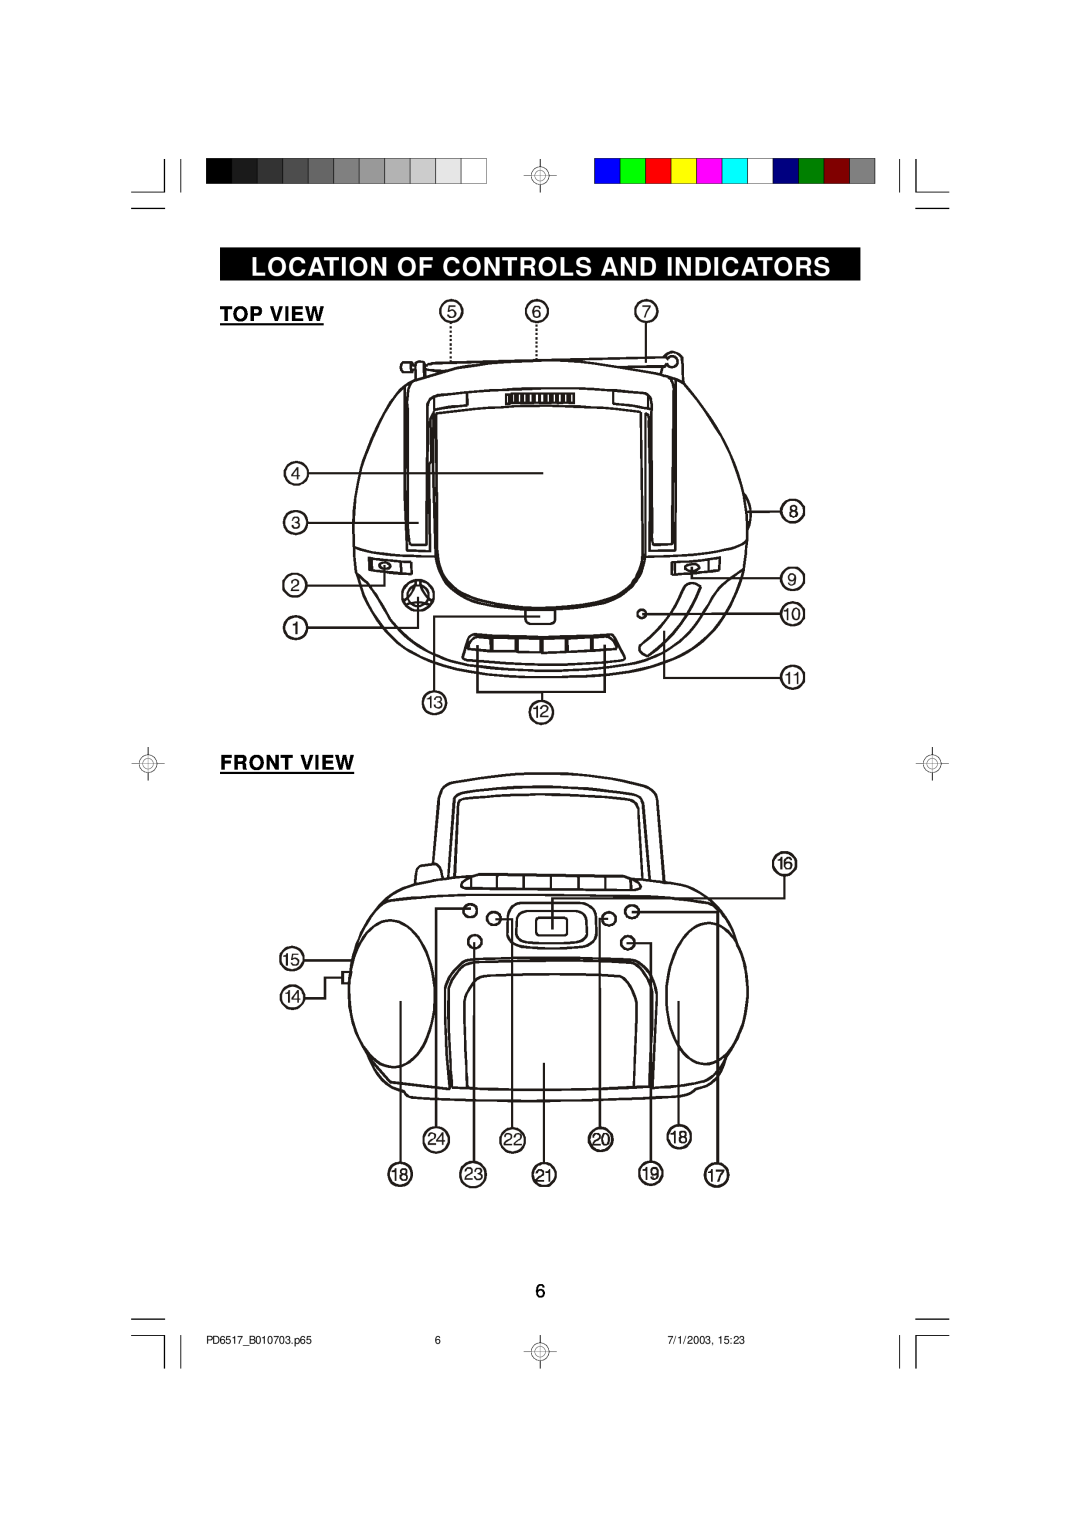 Emerson owner manual Location Of Controls And Indicators, Top View Front View, PD6517B010703.p65, 7/1/2003 